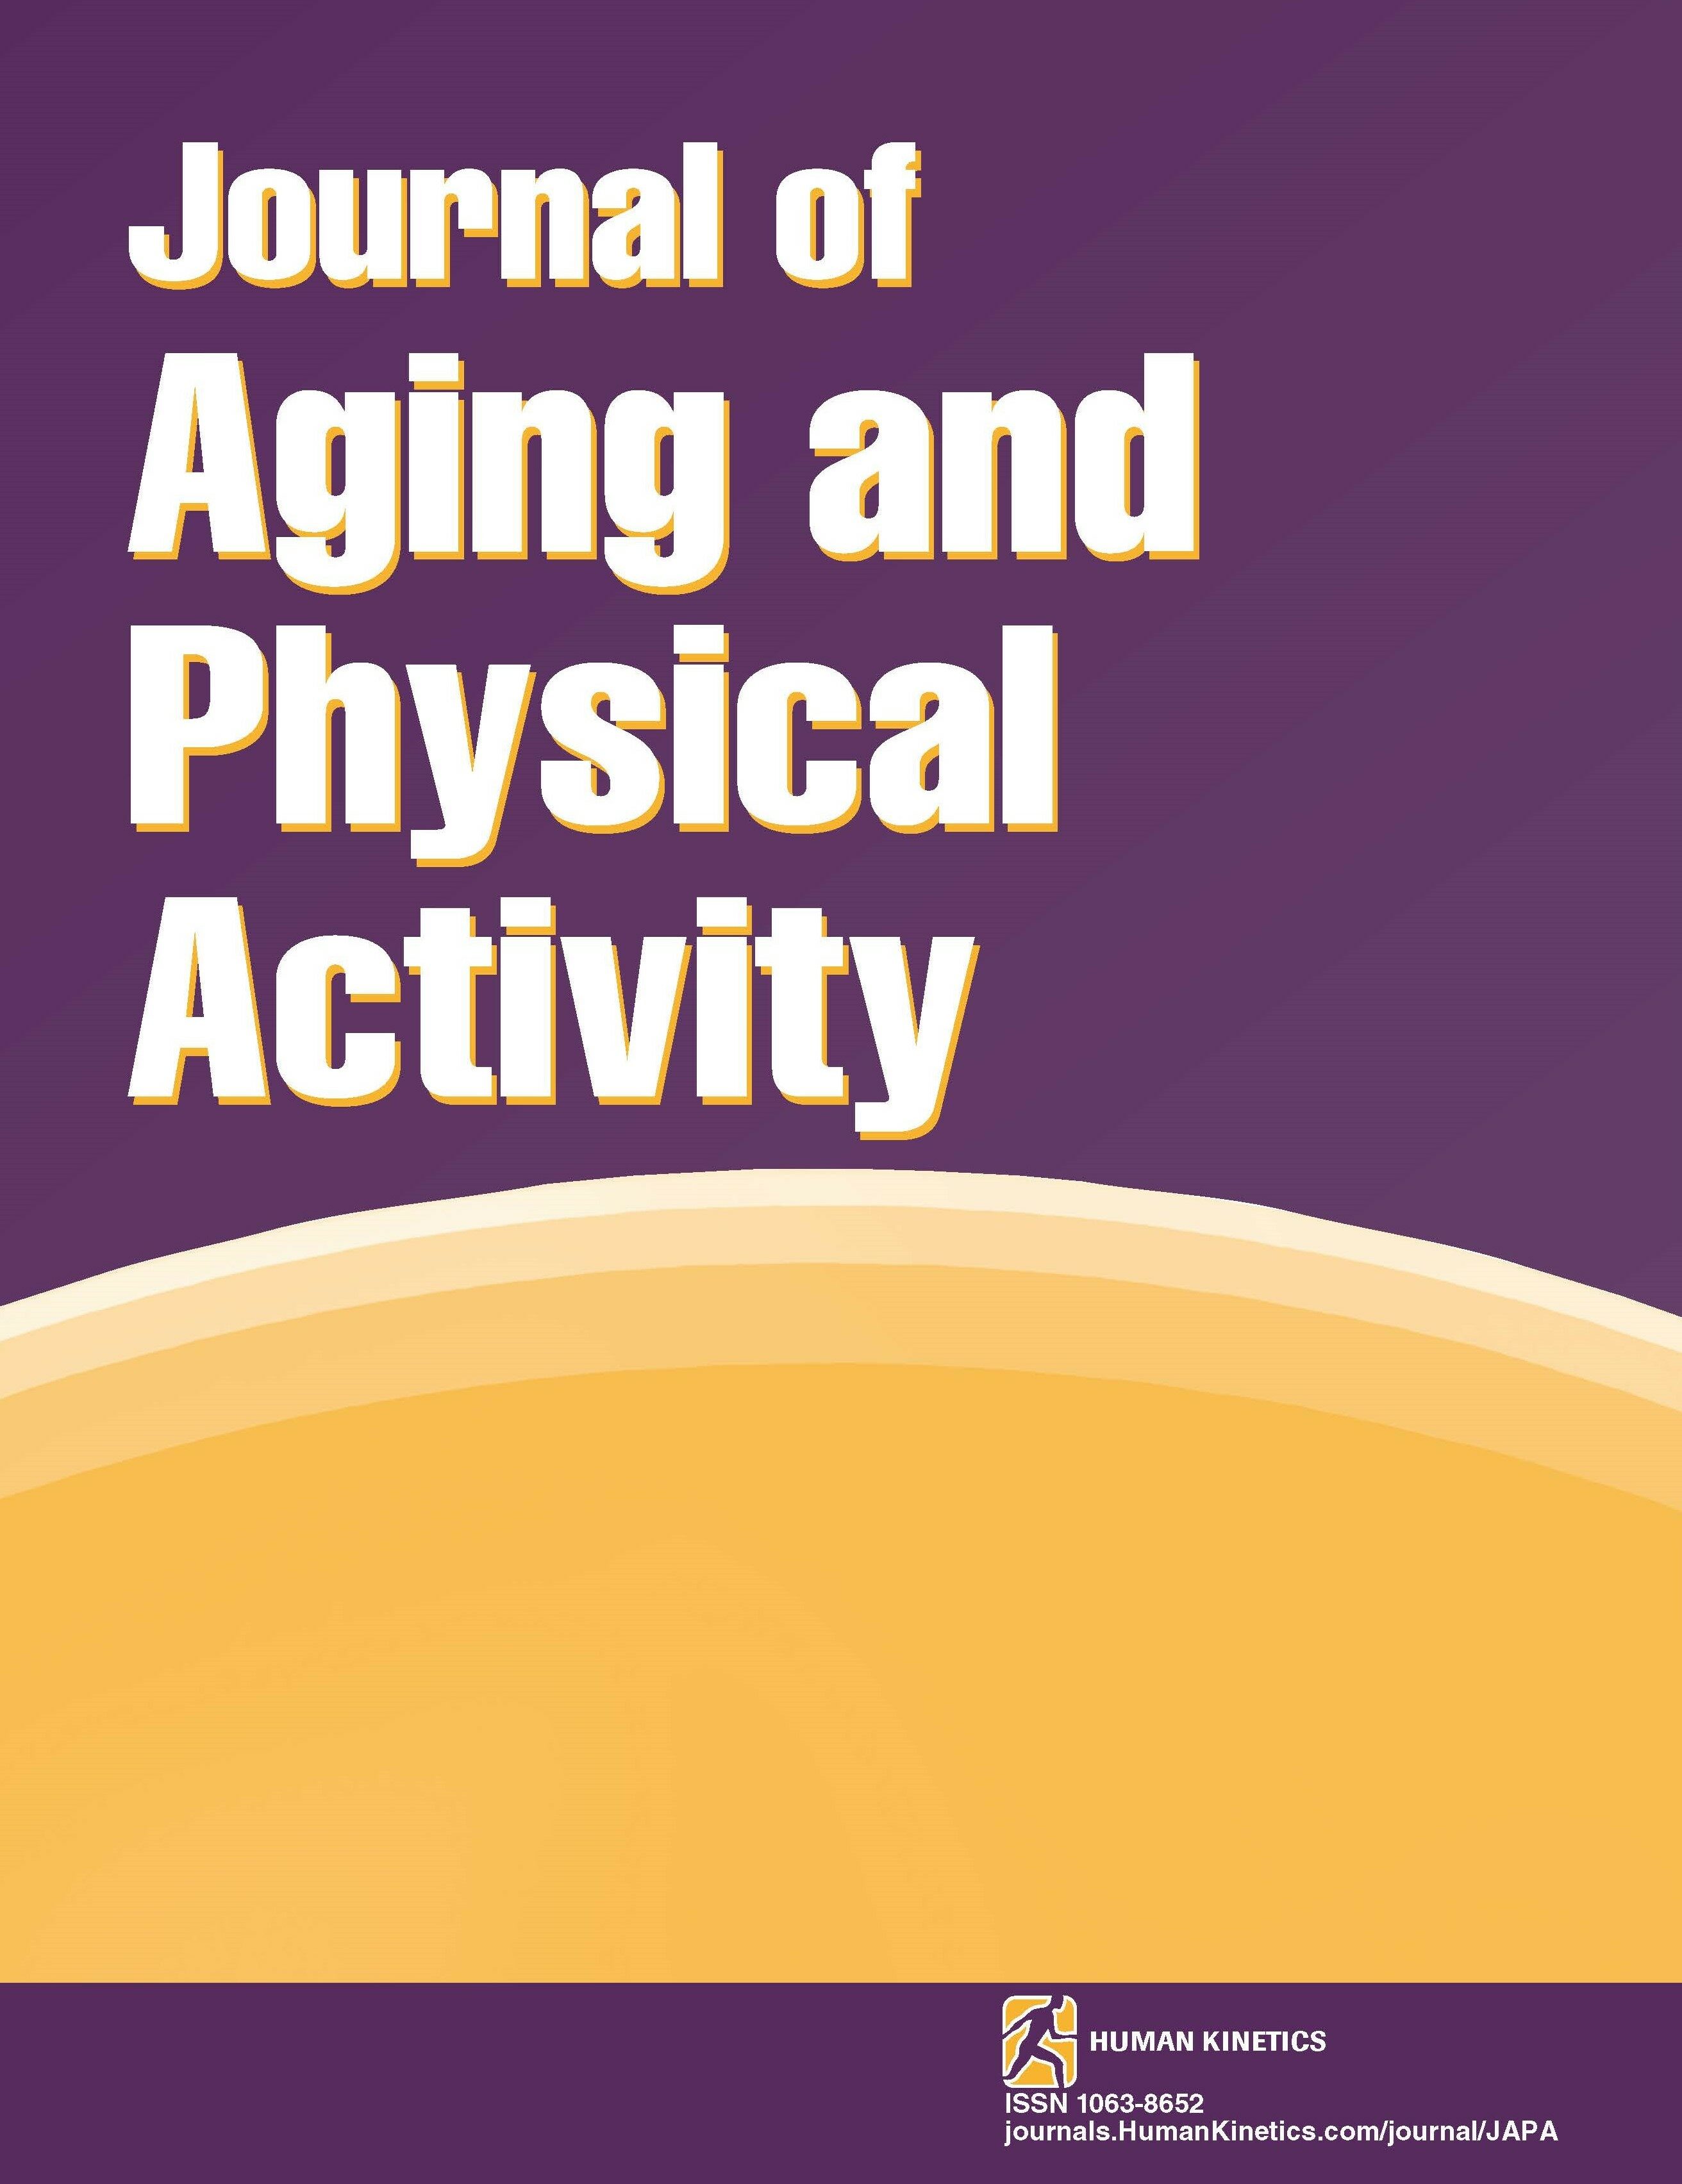 Physical Activity Patterns Within Dementia Care Dyads